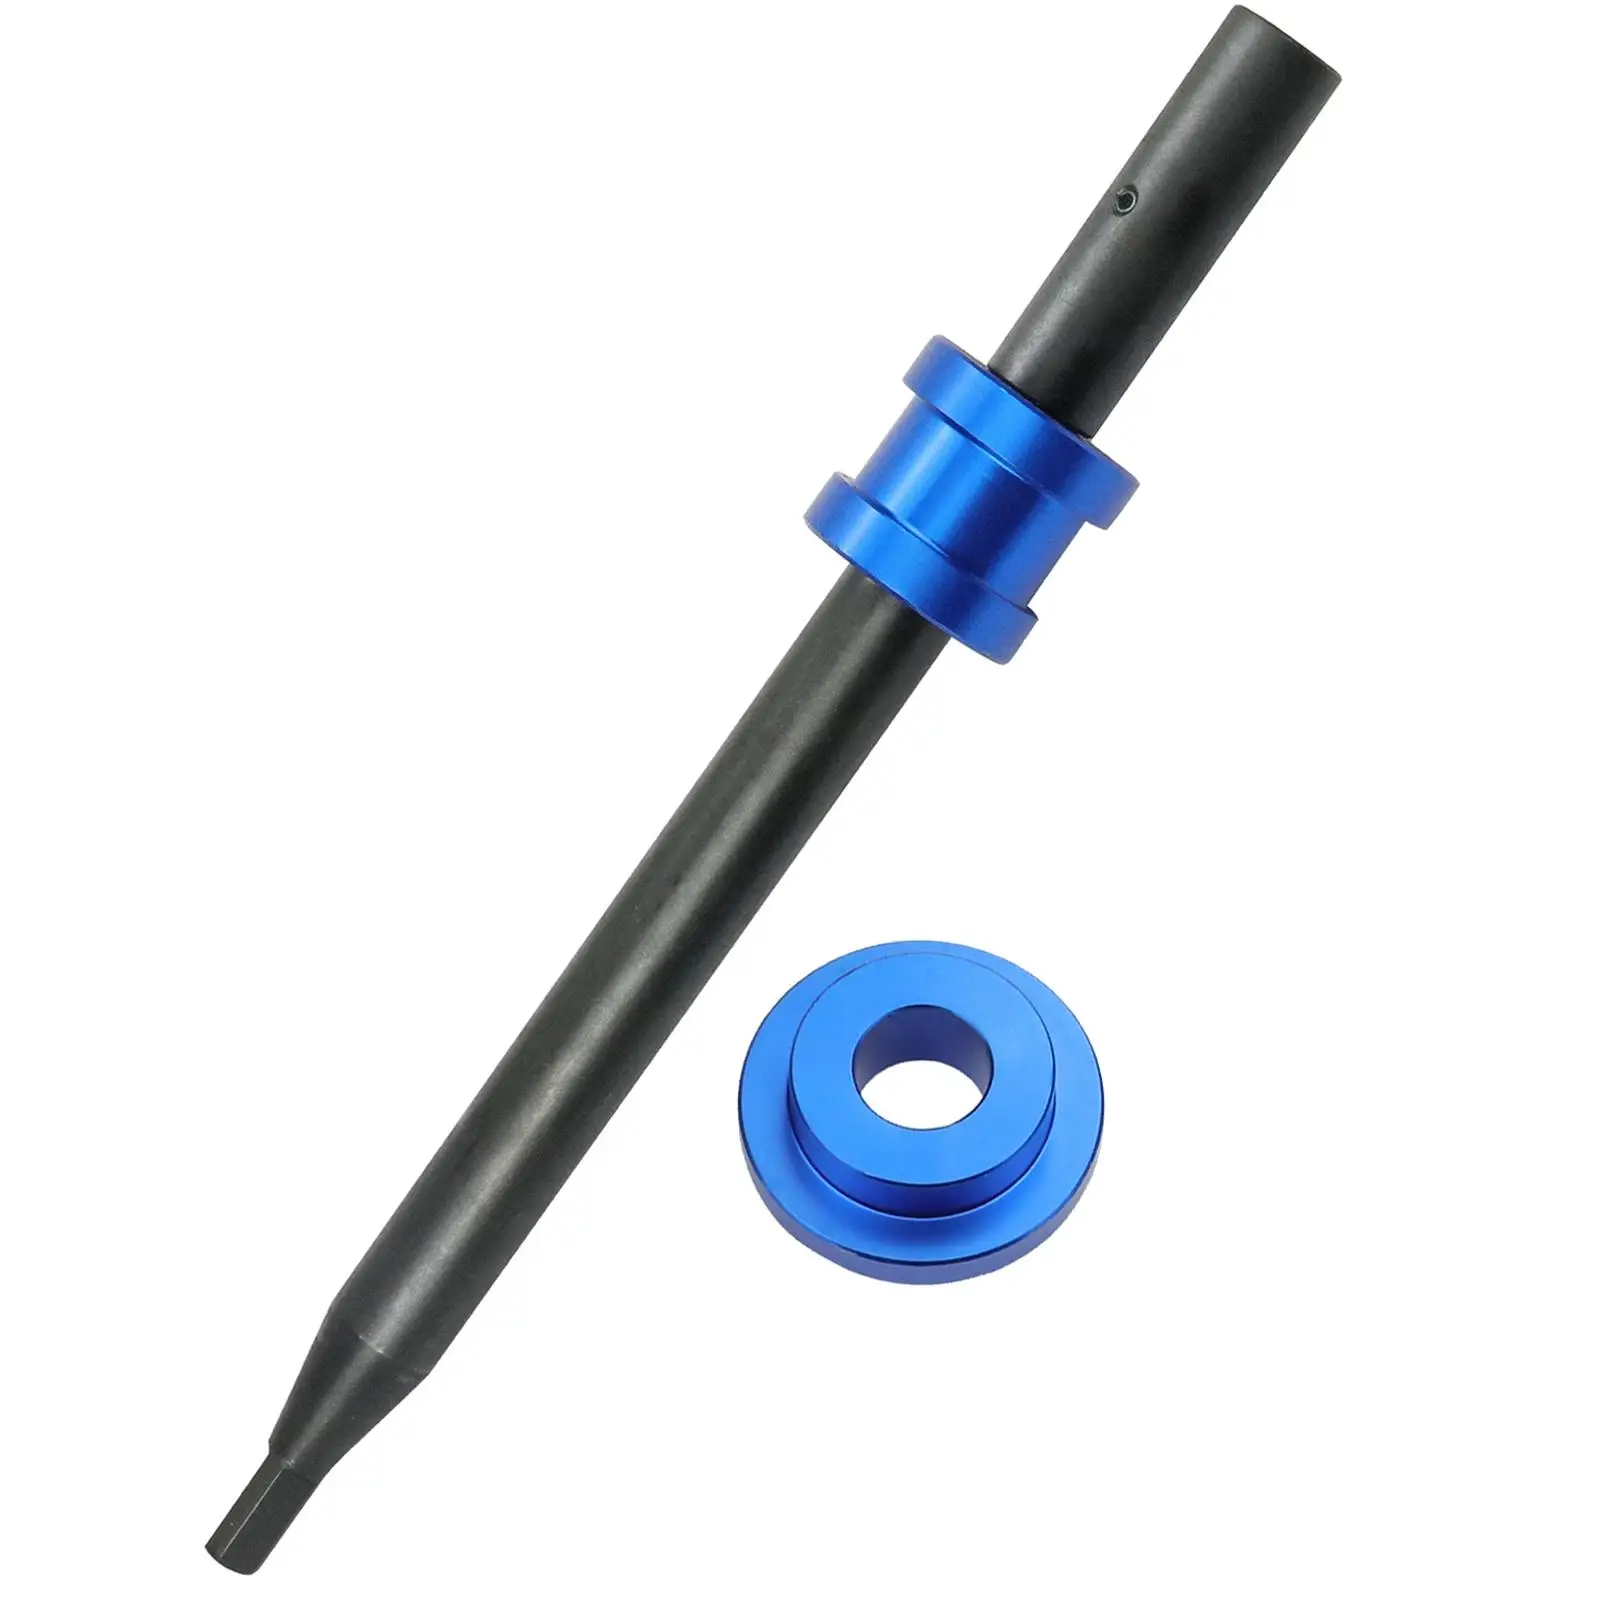 Engine Oil Pump Primer Tool Replaces Fits for V6 V8 Small